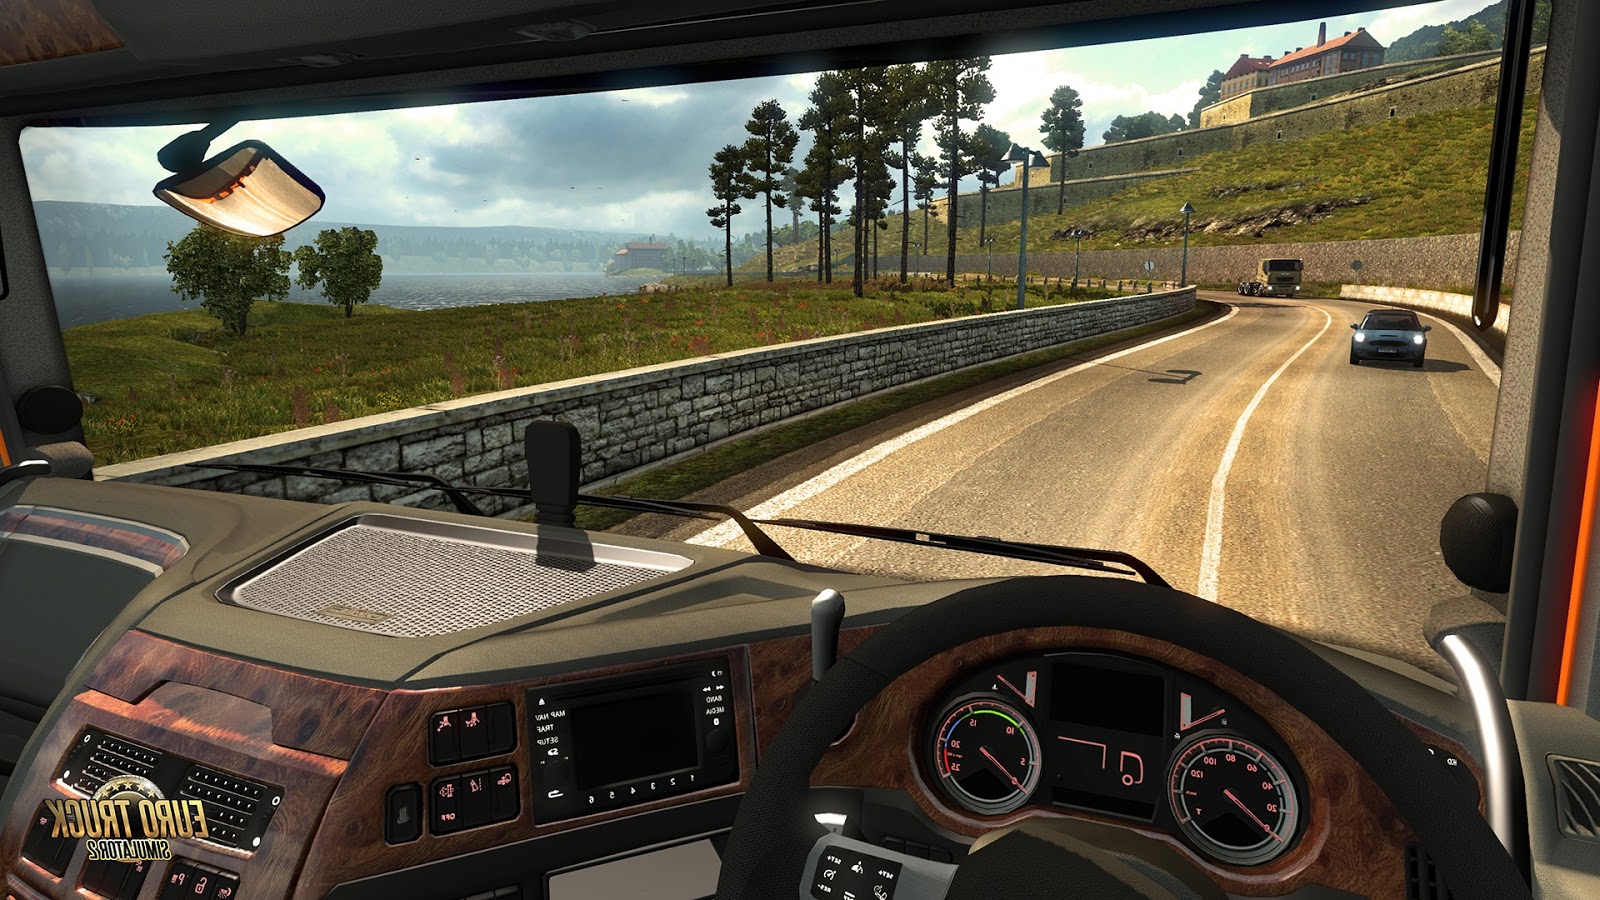 euro truck simulator 2 download free android